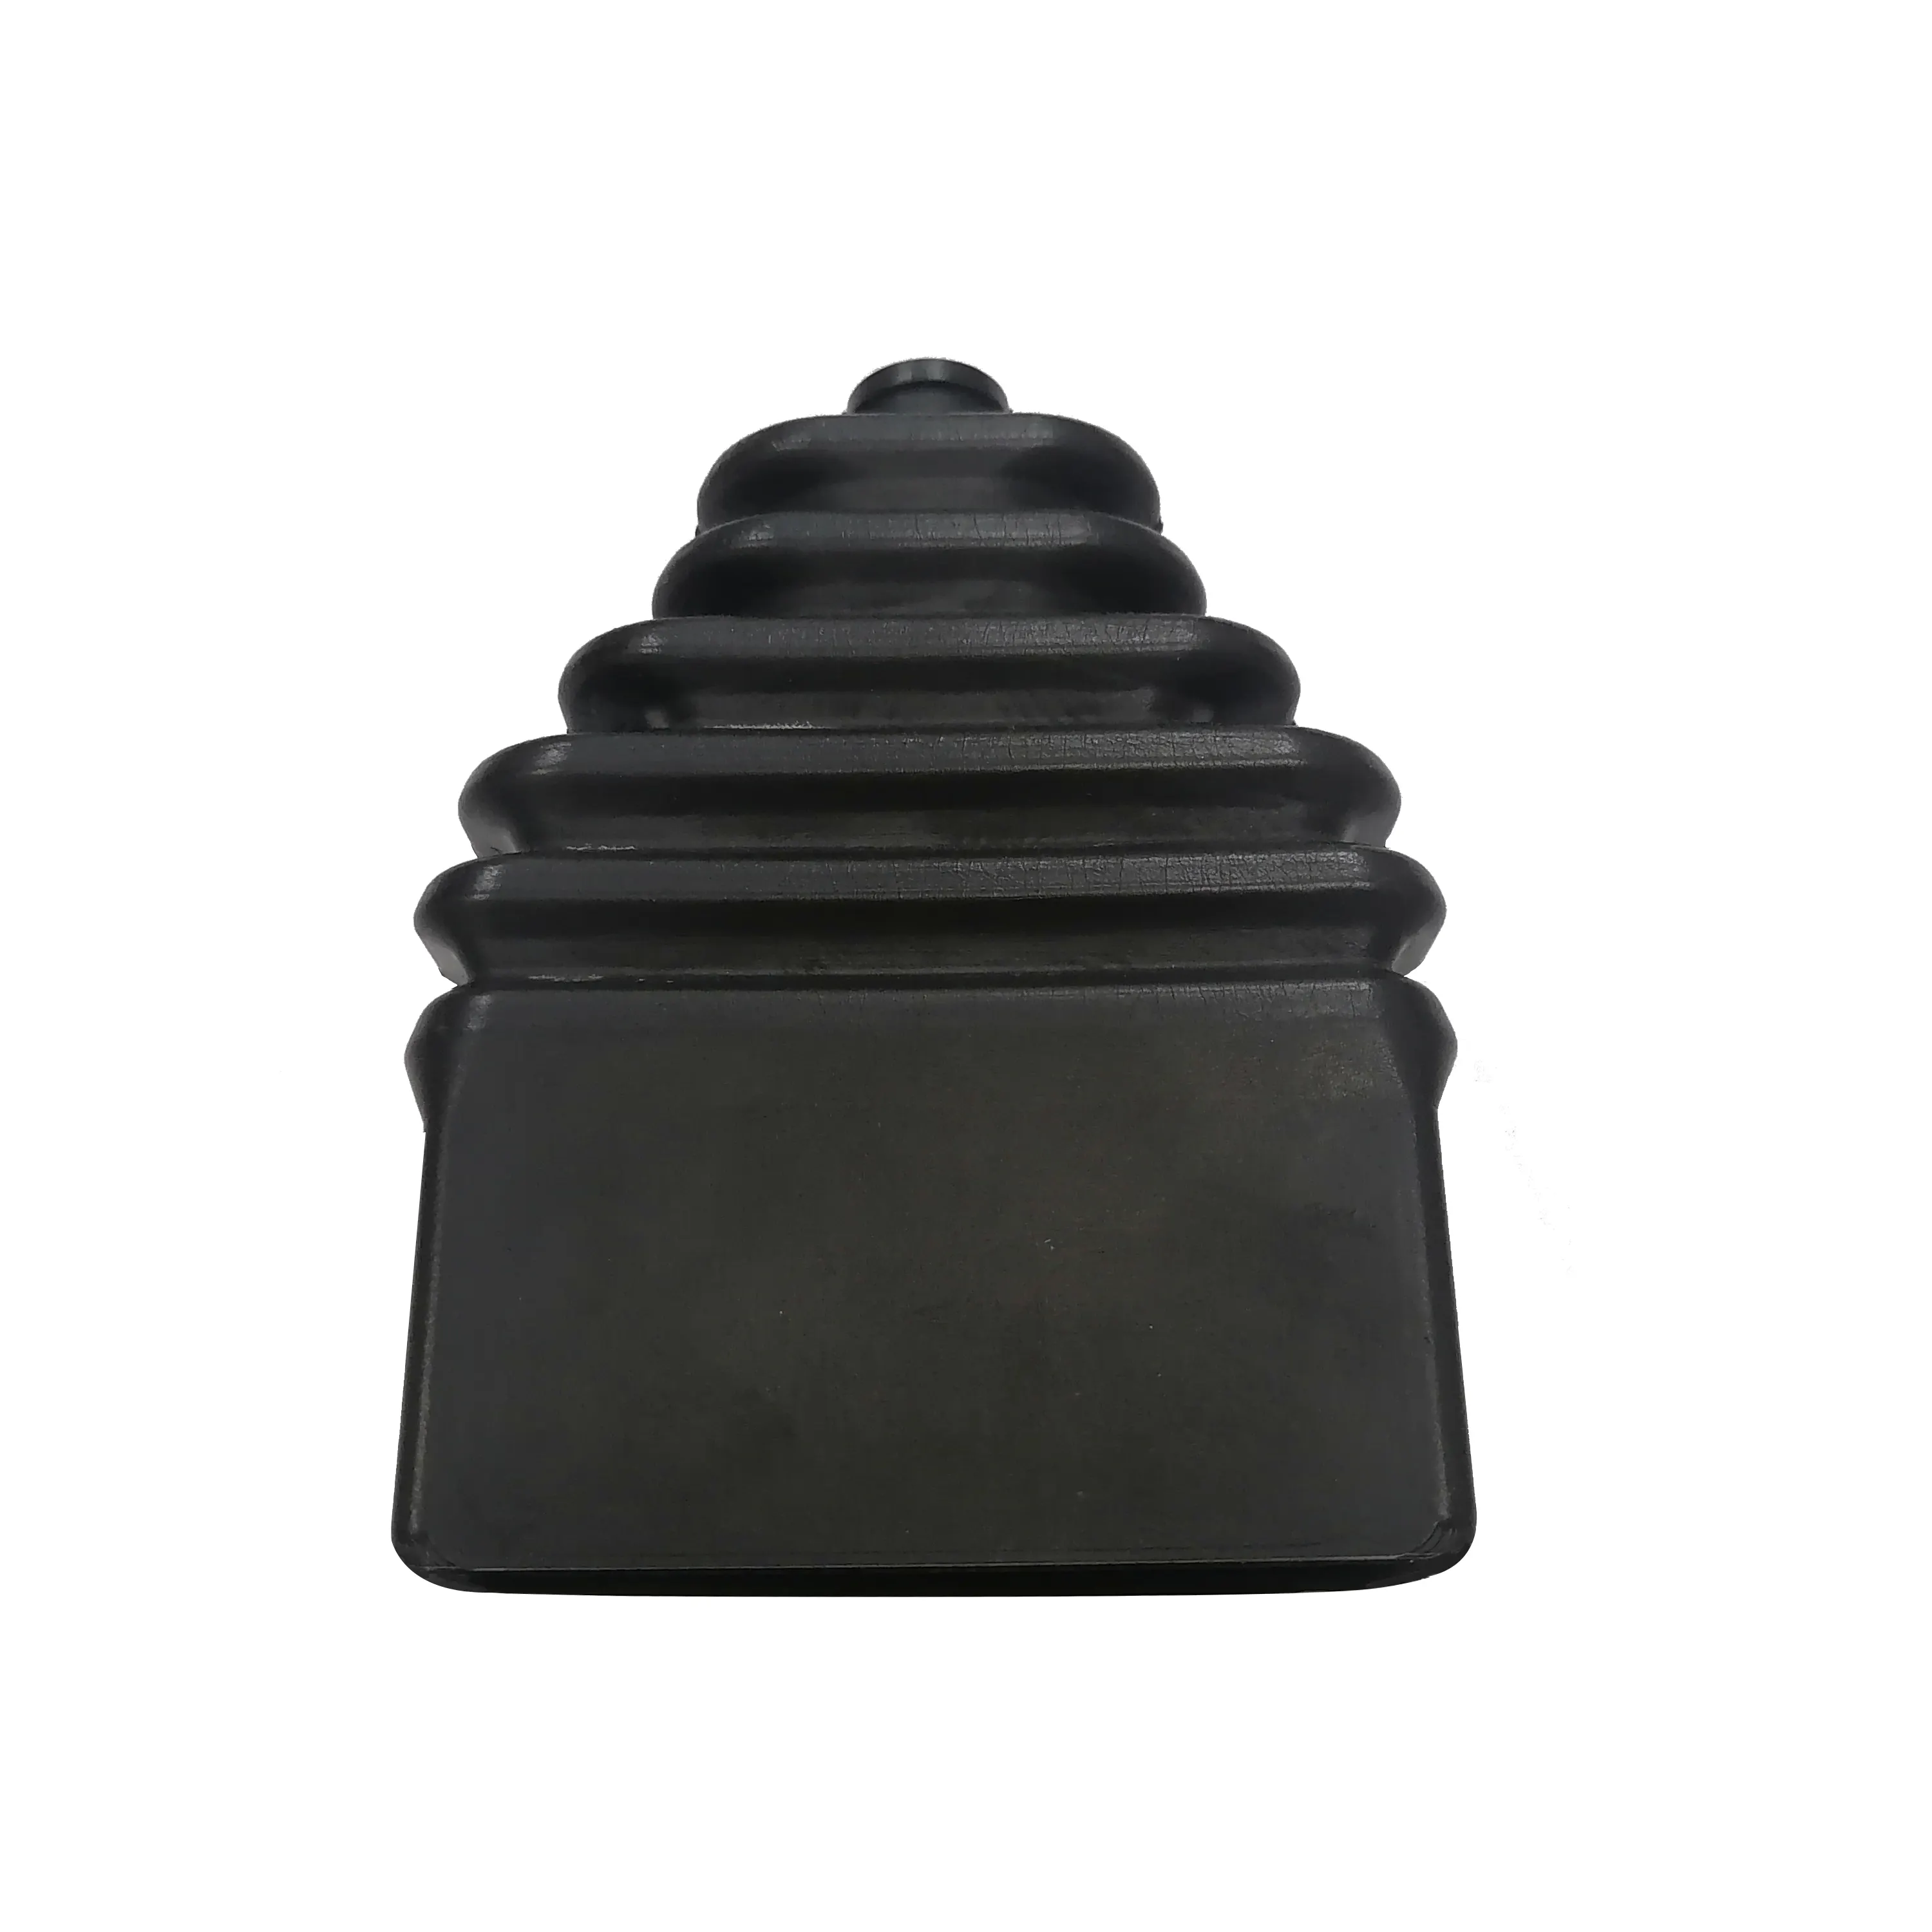 rubber bellows dust cover waterproof rust protection